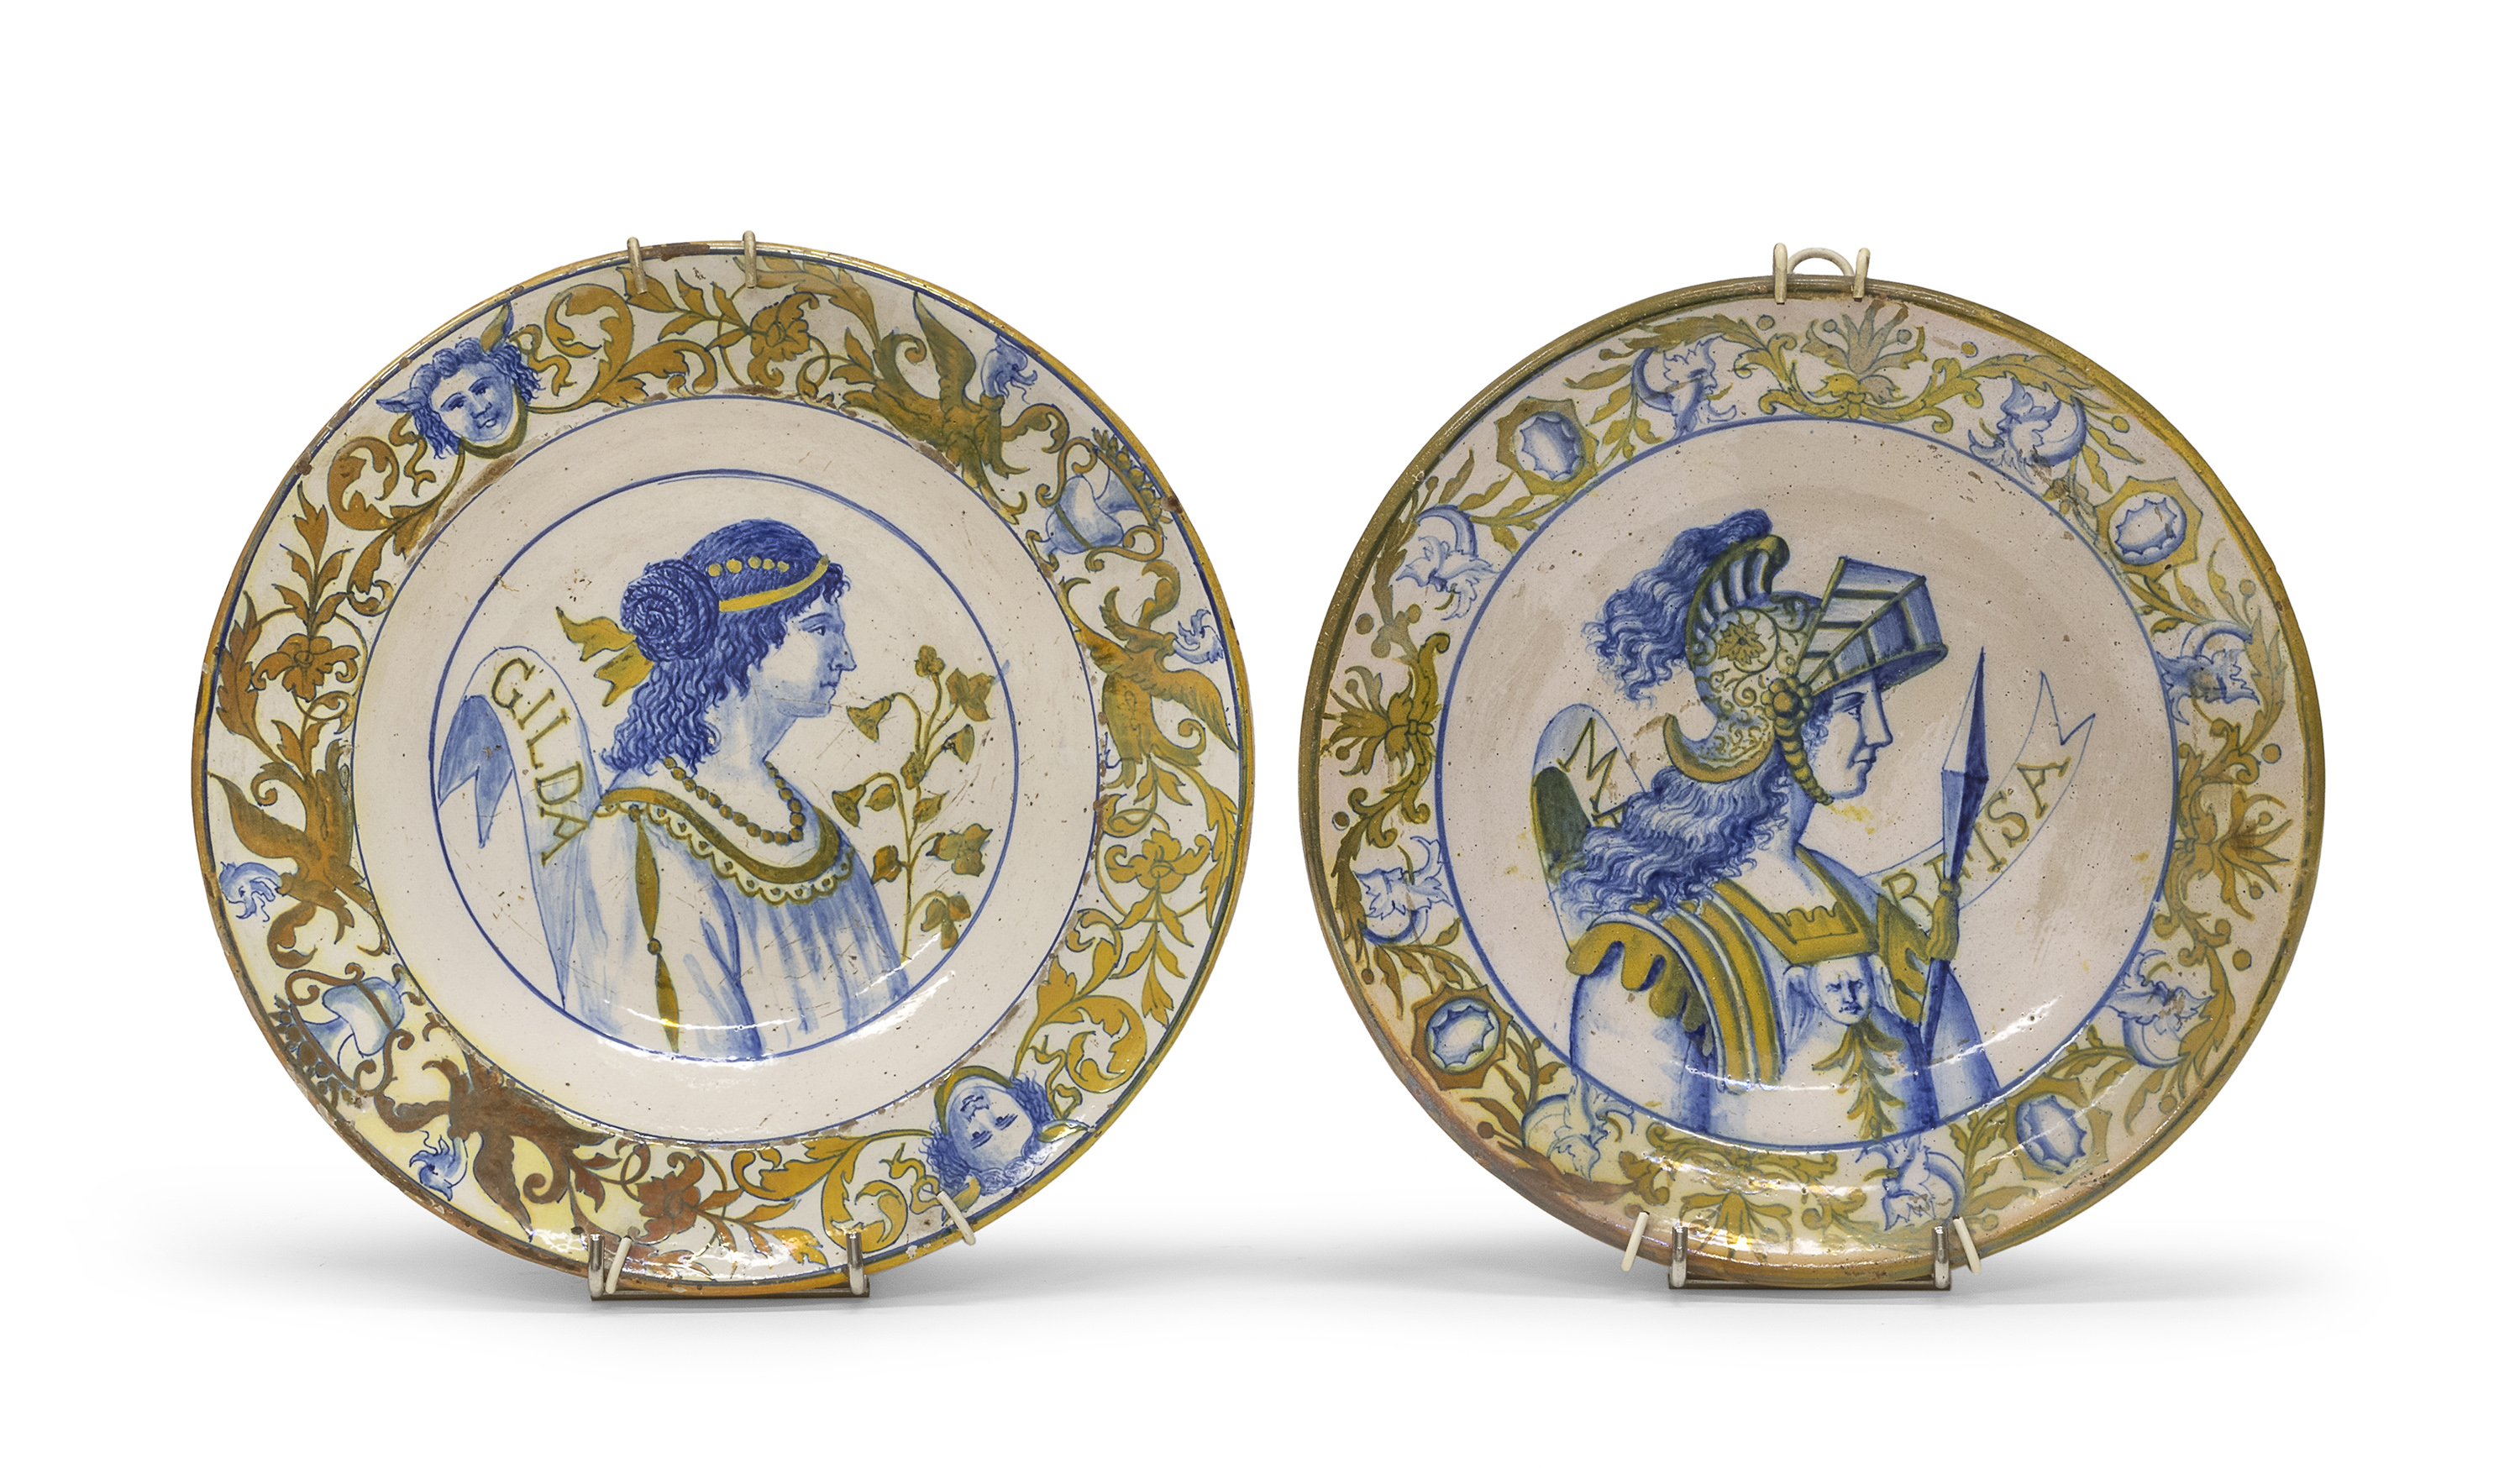 TWO LUSTER CERAMIC PLATES END OF THE 19TH CENTURY